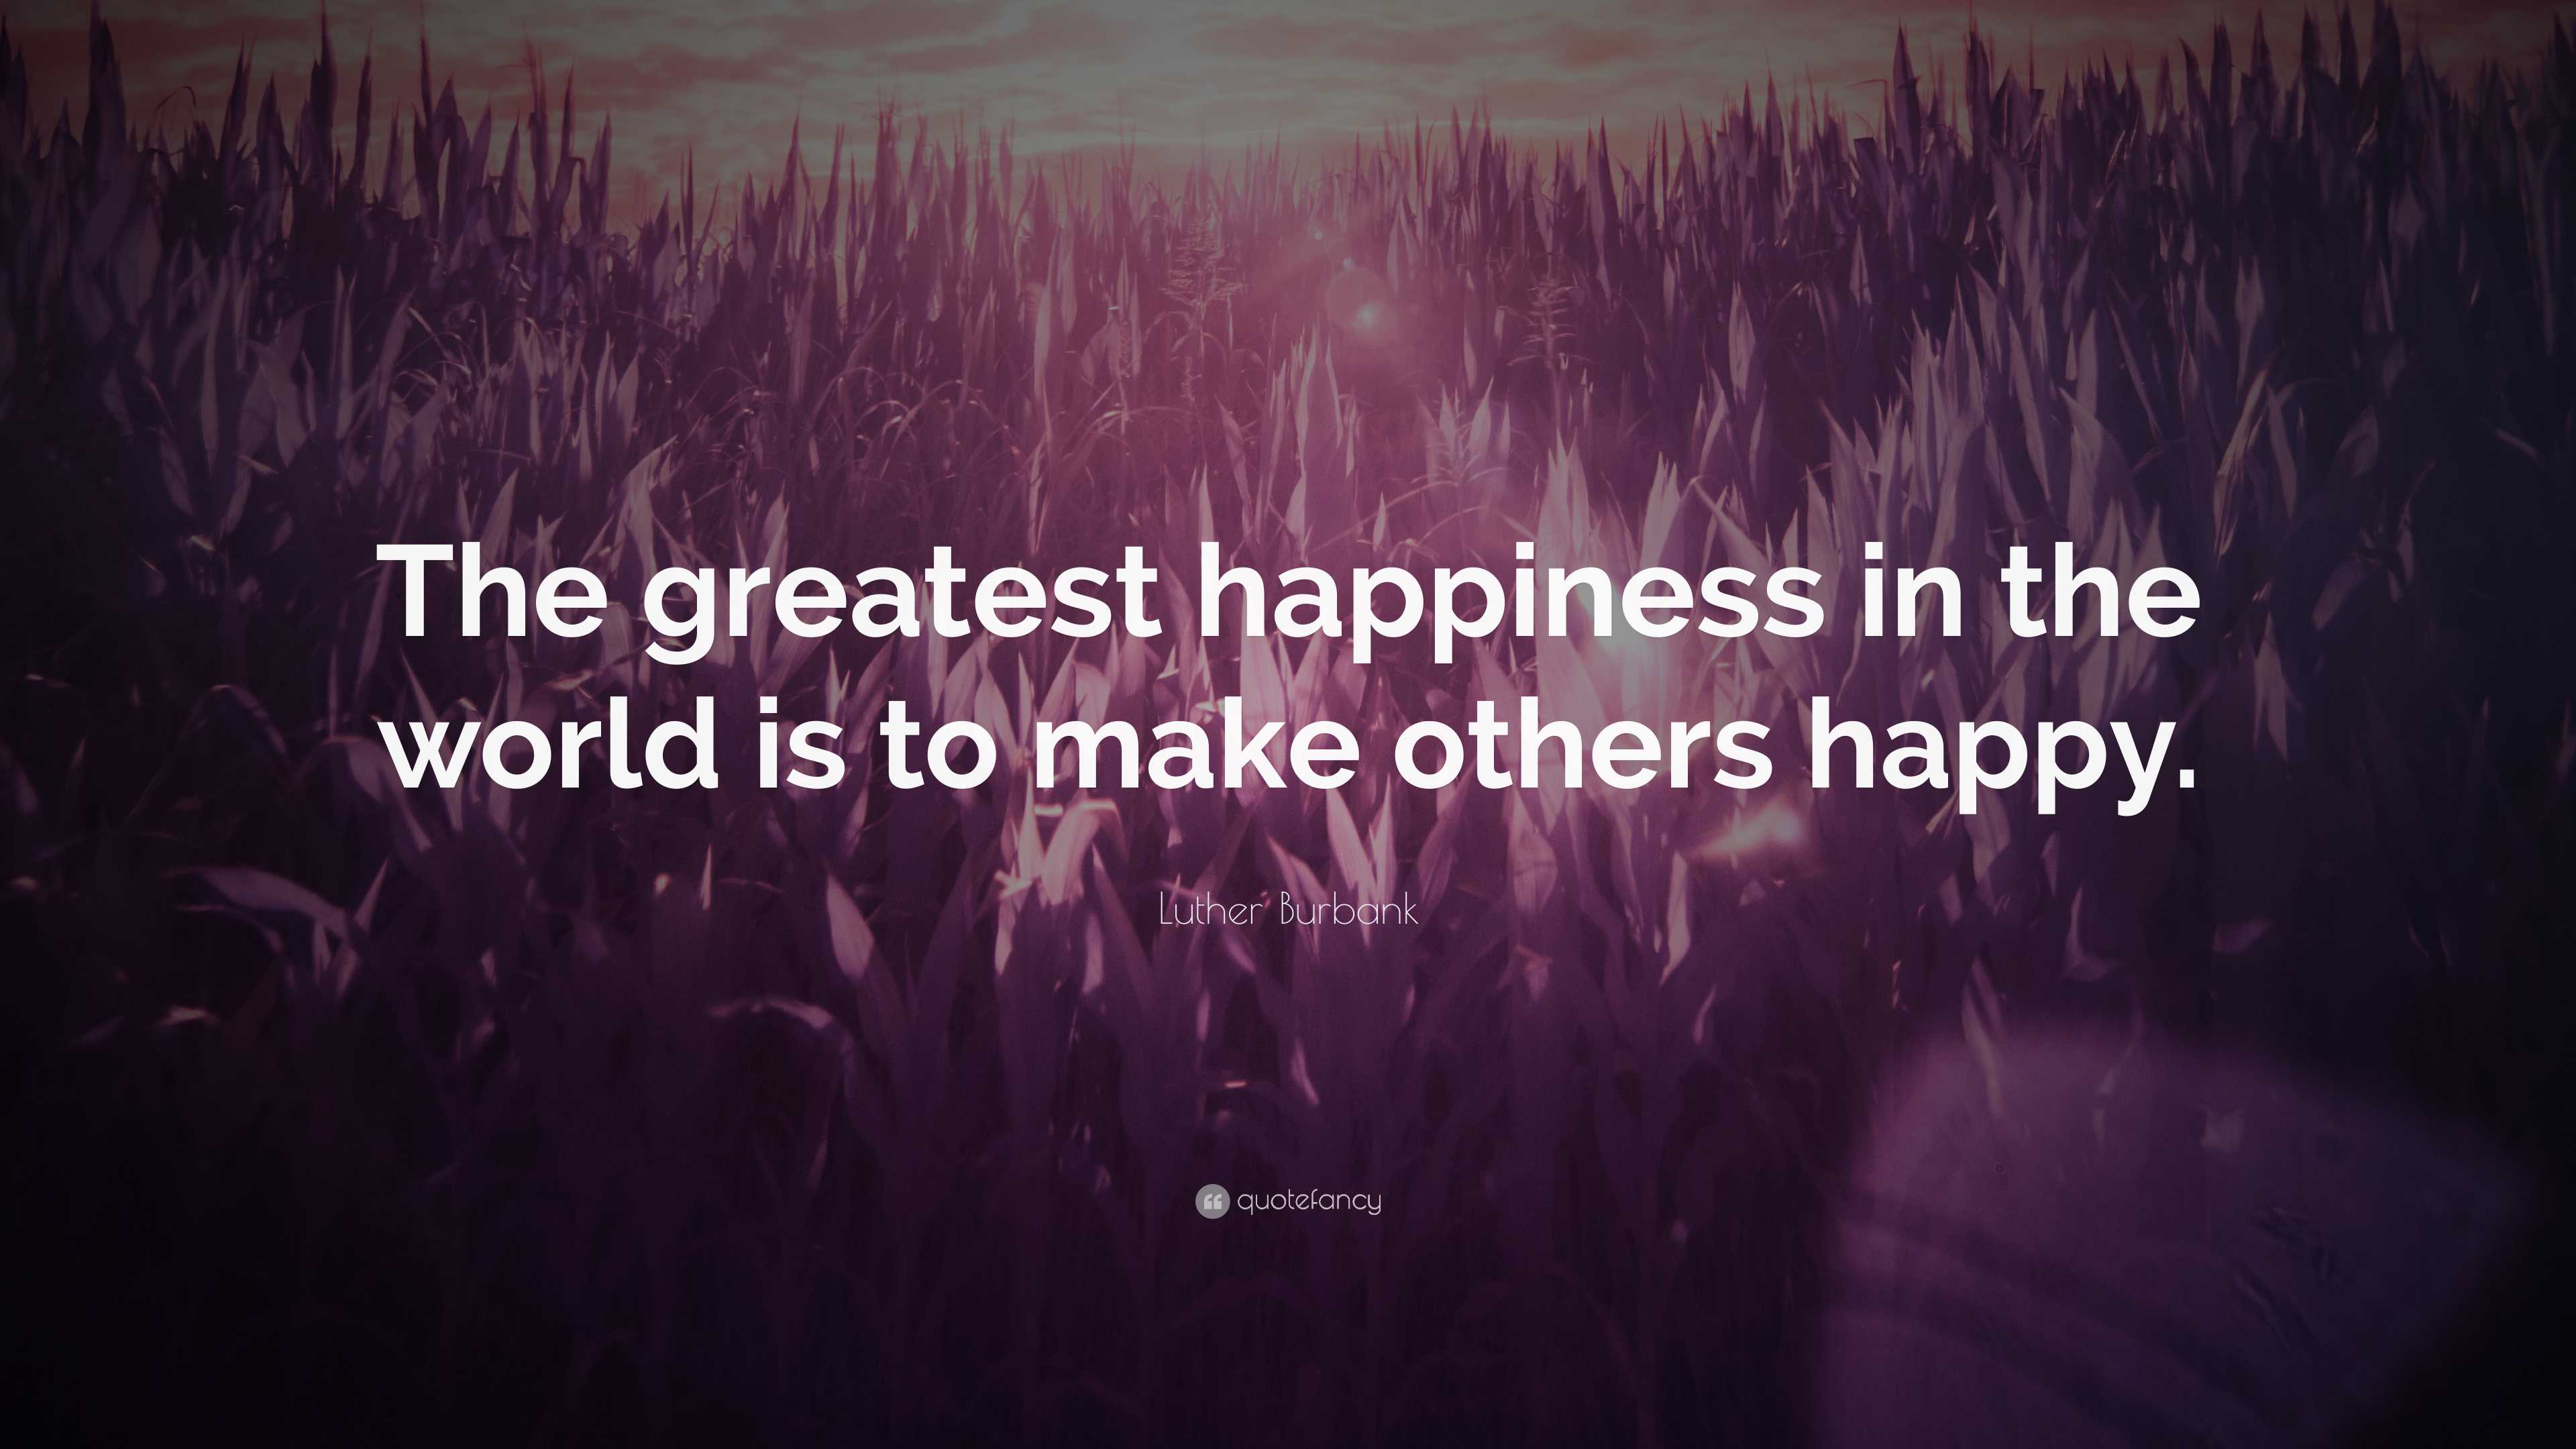 Luther Burbank Quote: “The greatest happiness in the world is to make  others happy.”